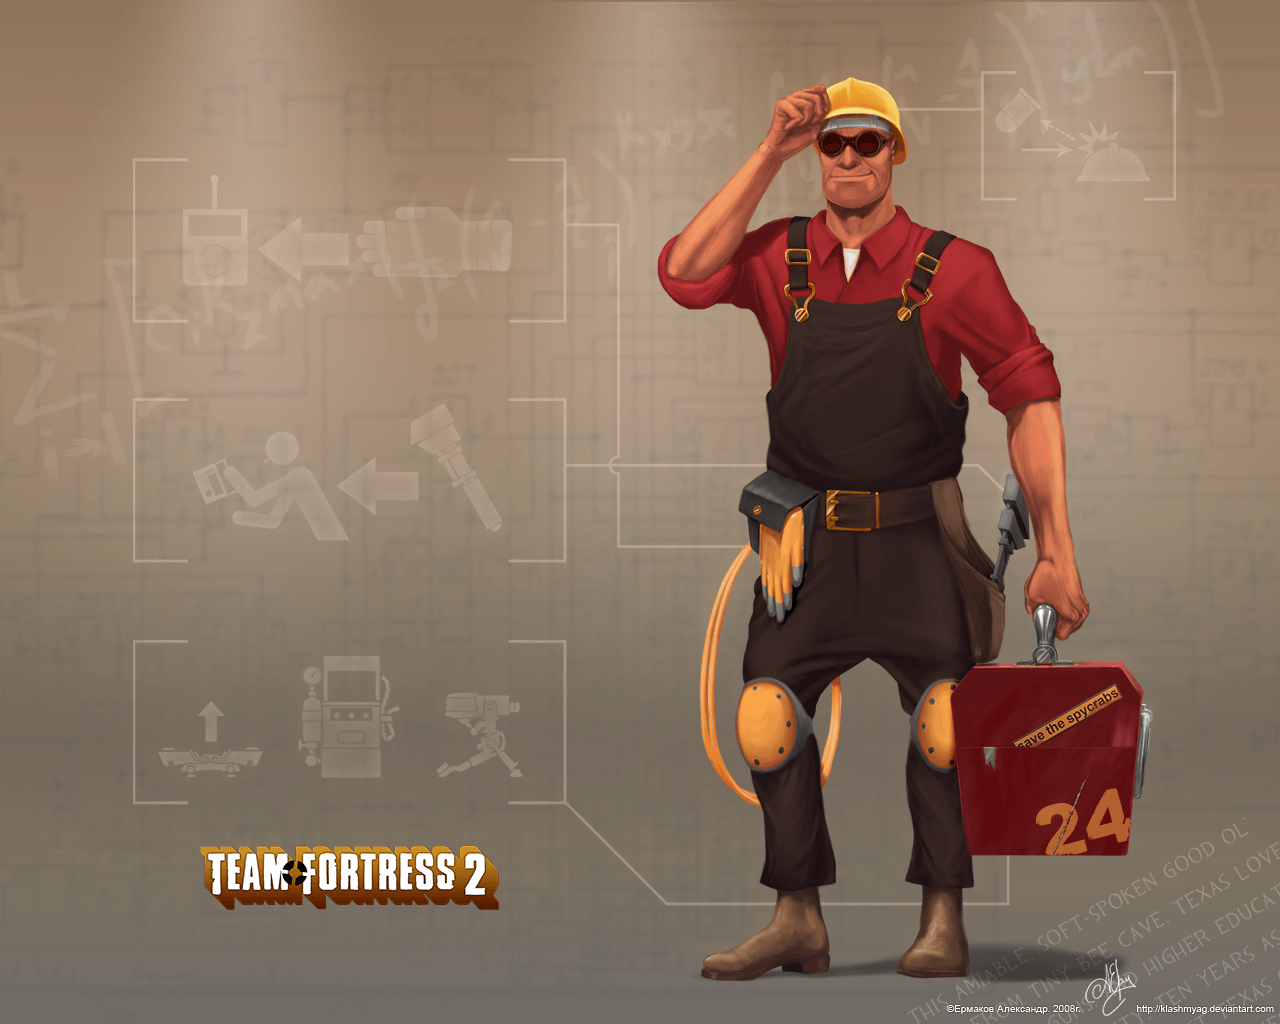 Image For > Engineer Tf2 Wallpapers